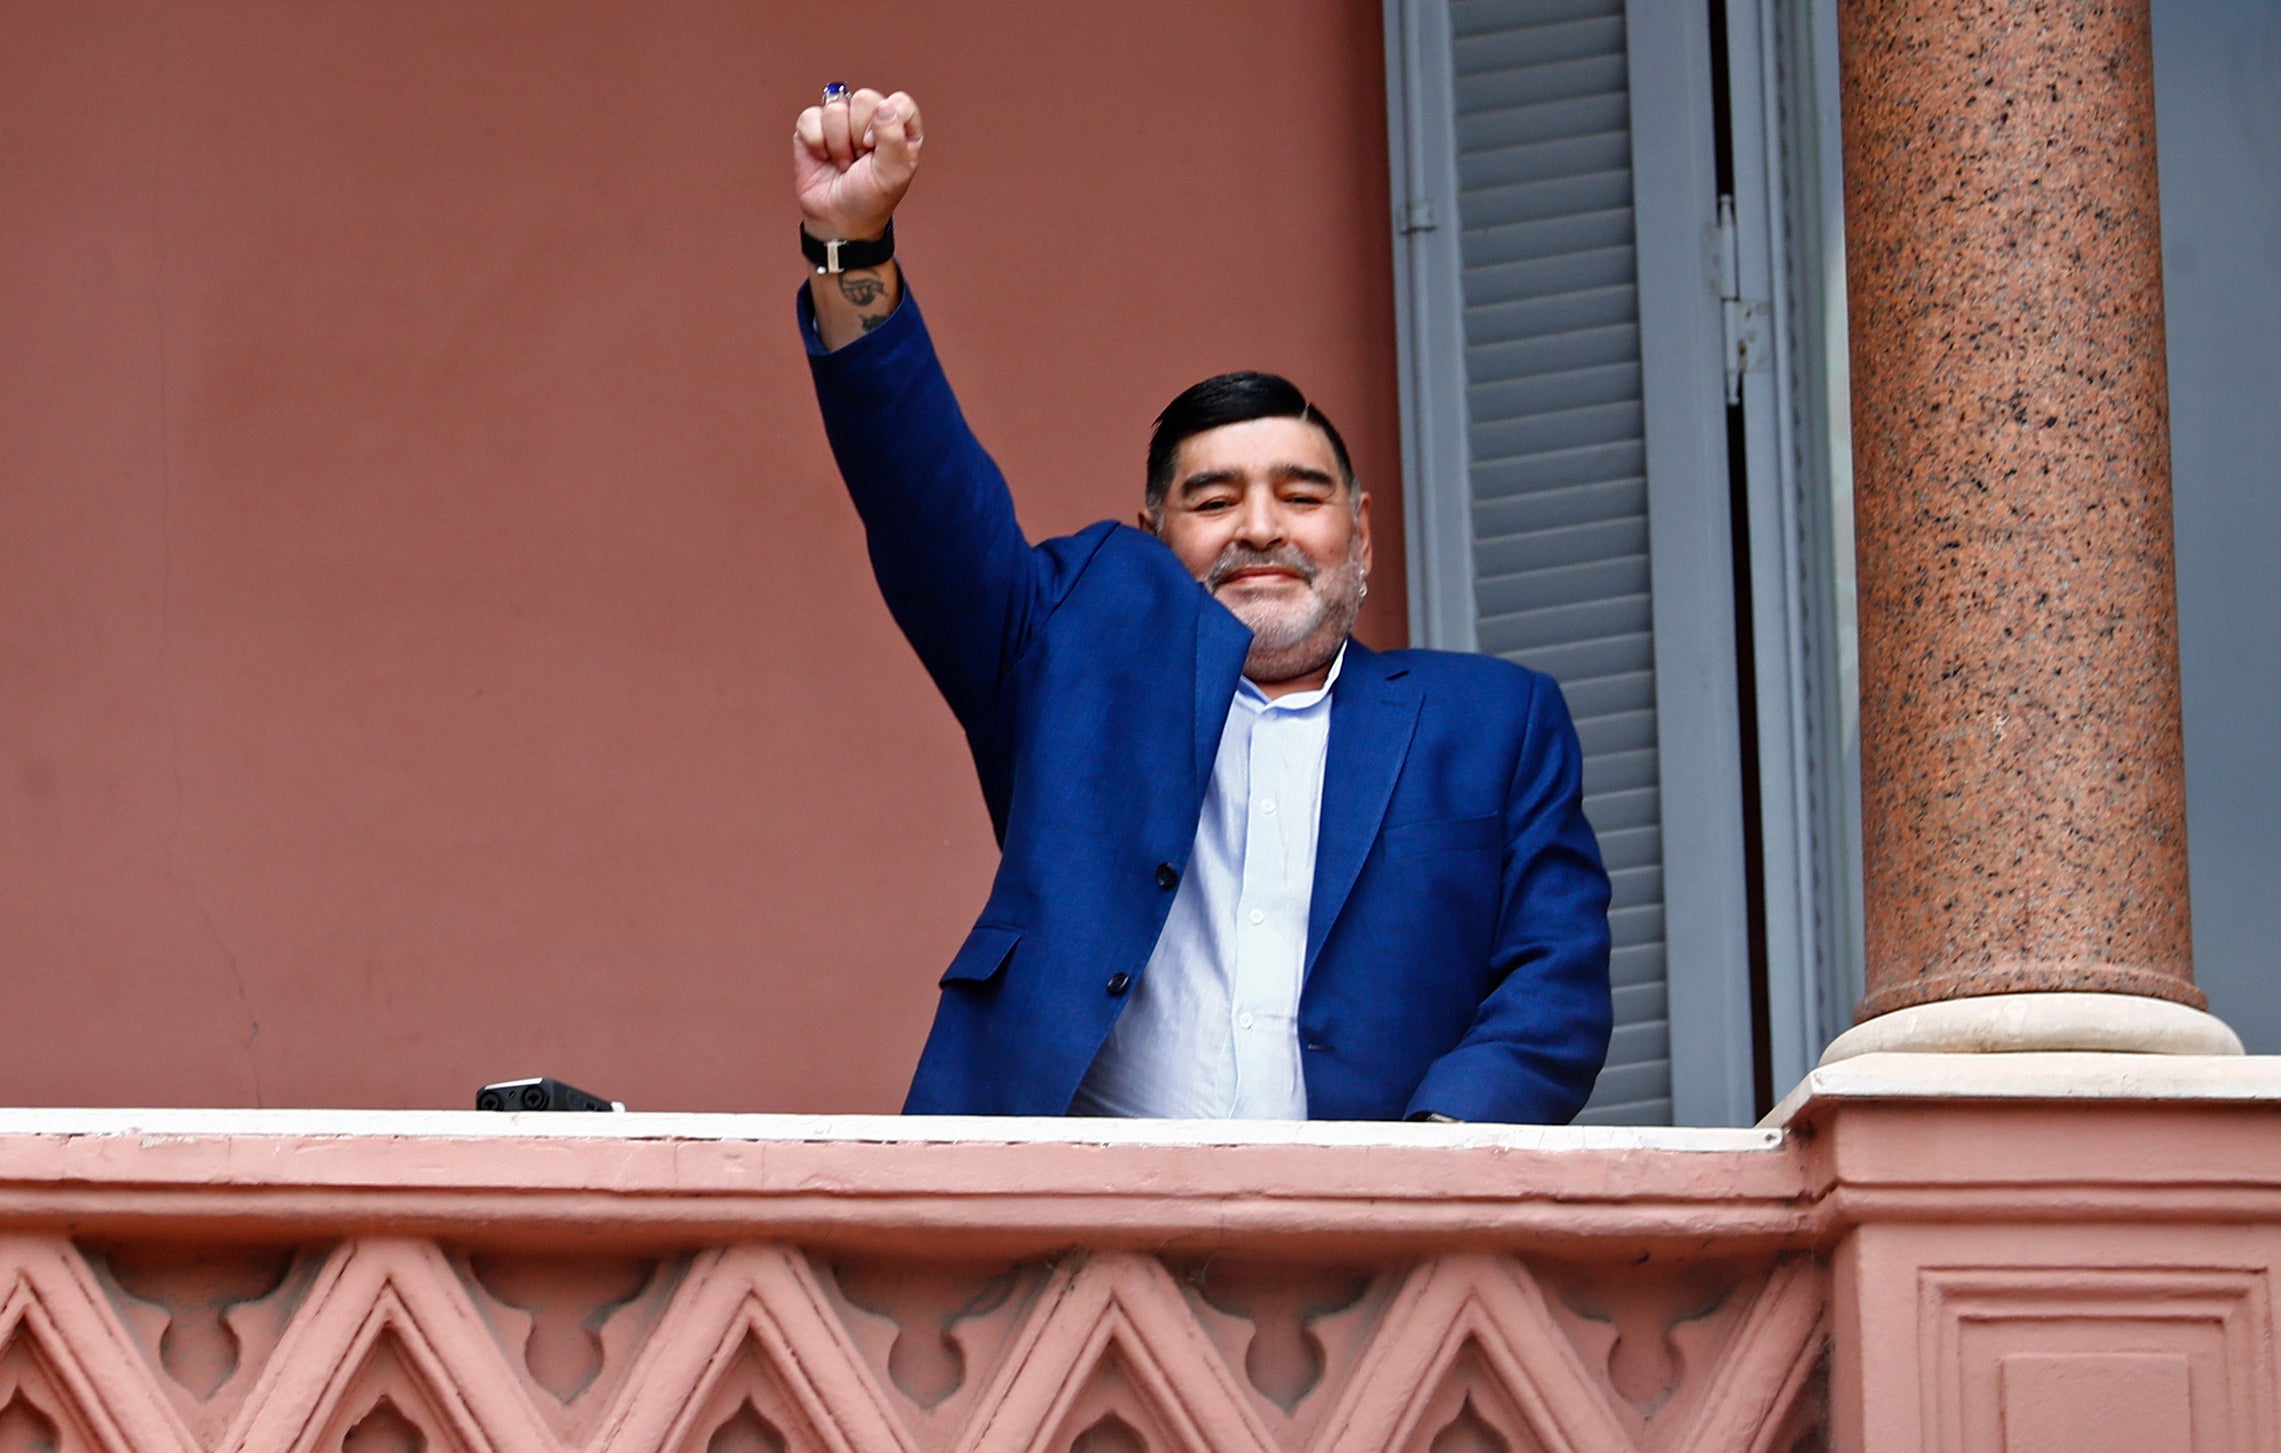 Former soccer great Diego Maradona acknowledges fans below at the Casa Rosada government house